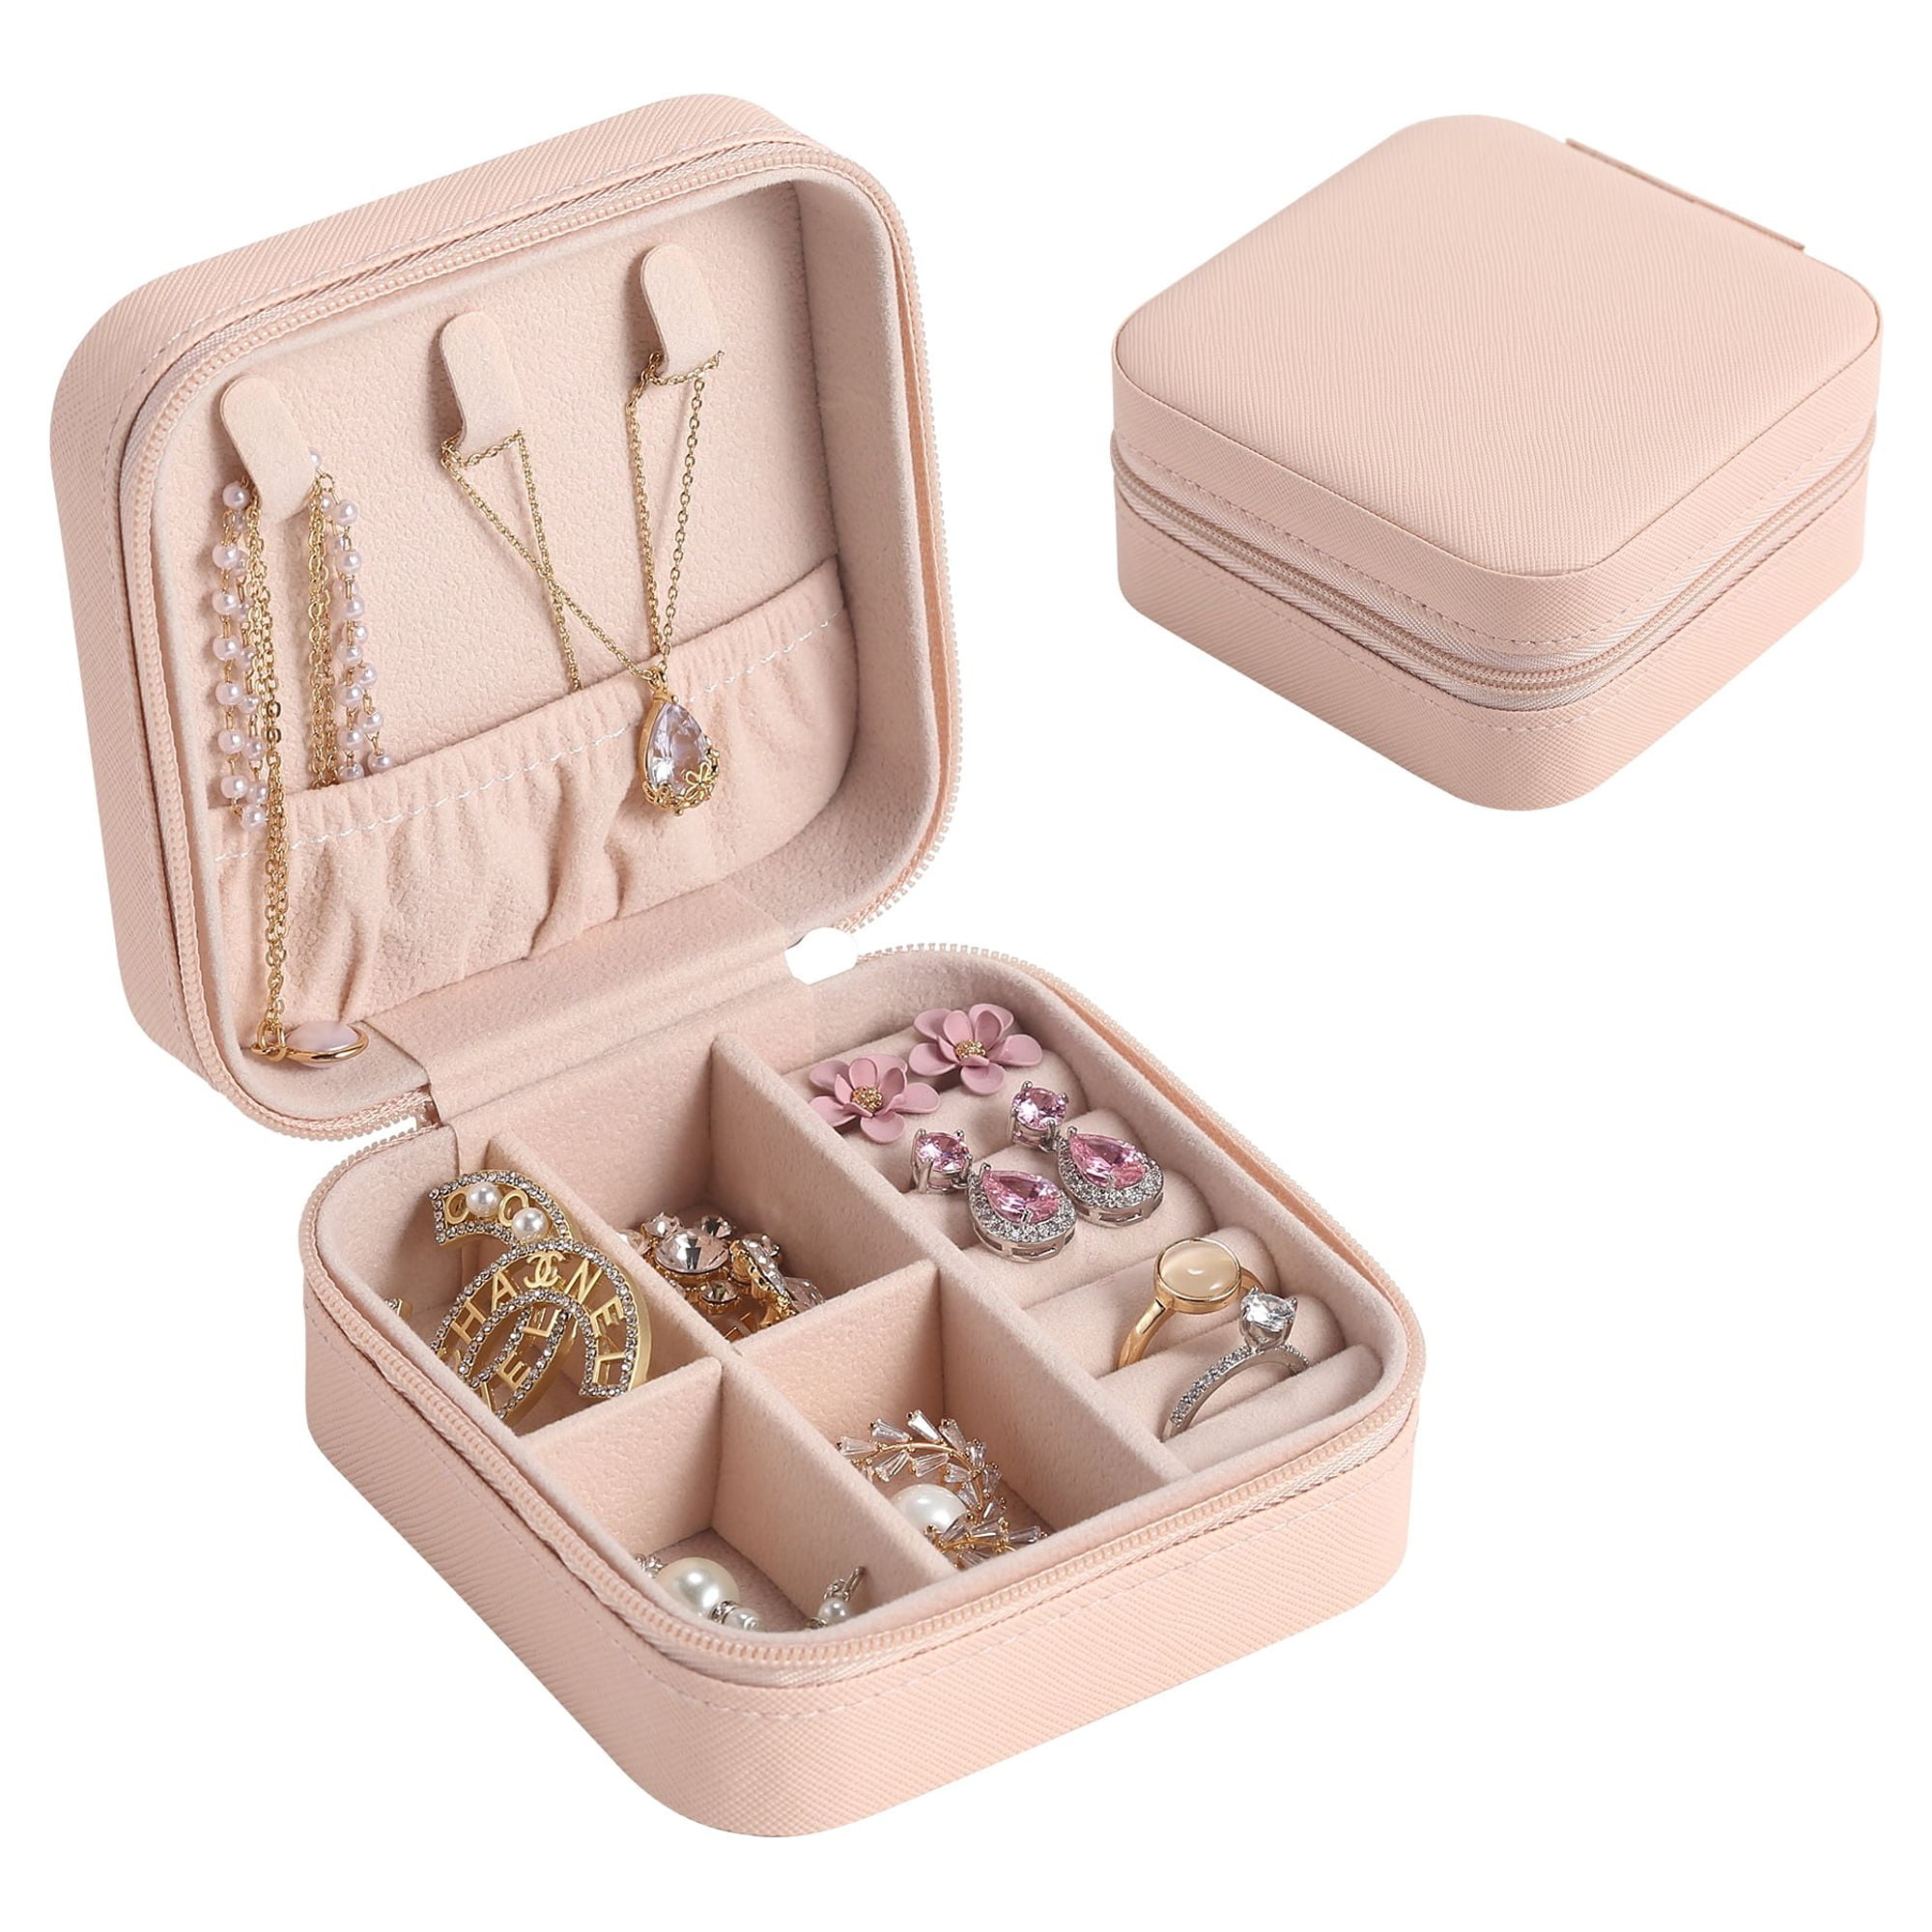 Travel Velvet Jewelry Box with Mirror, Mini Gifts Case for Women Girls,  Small Portable Organizer Boxes for Rings Earrings Necklaces Bracelets